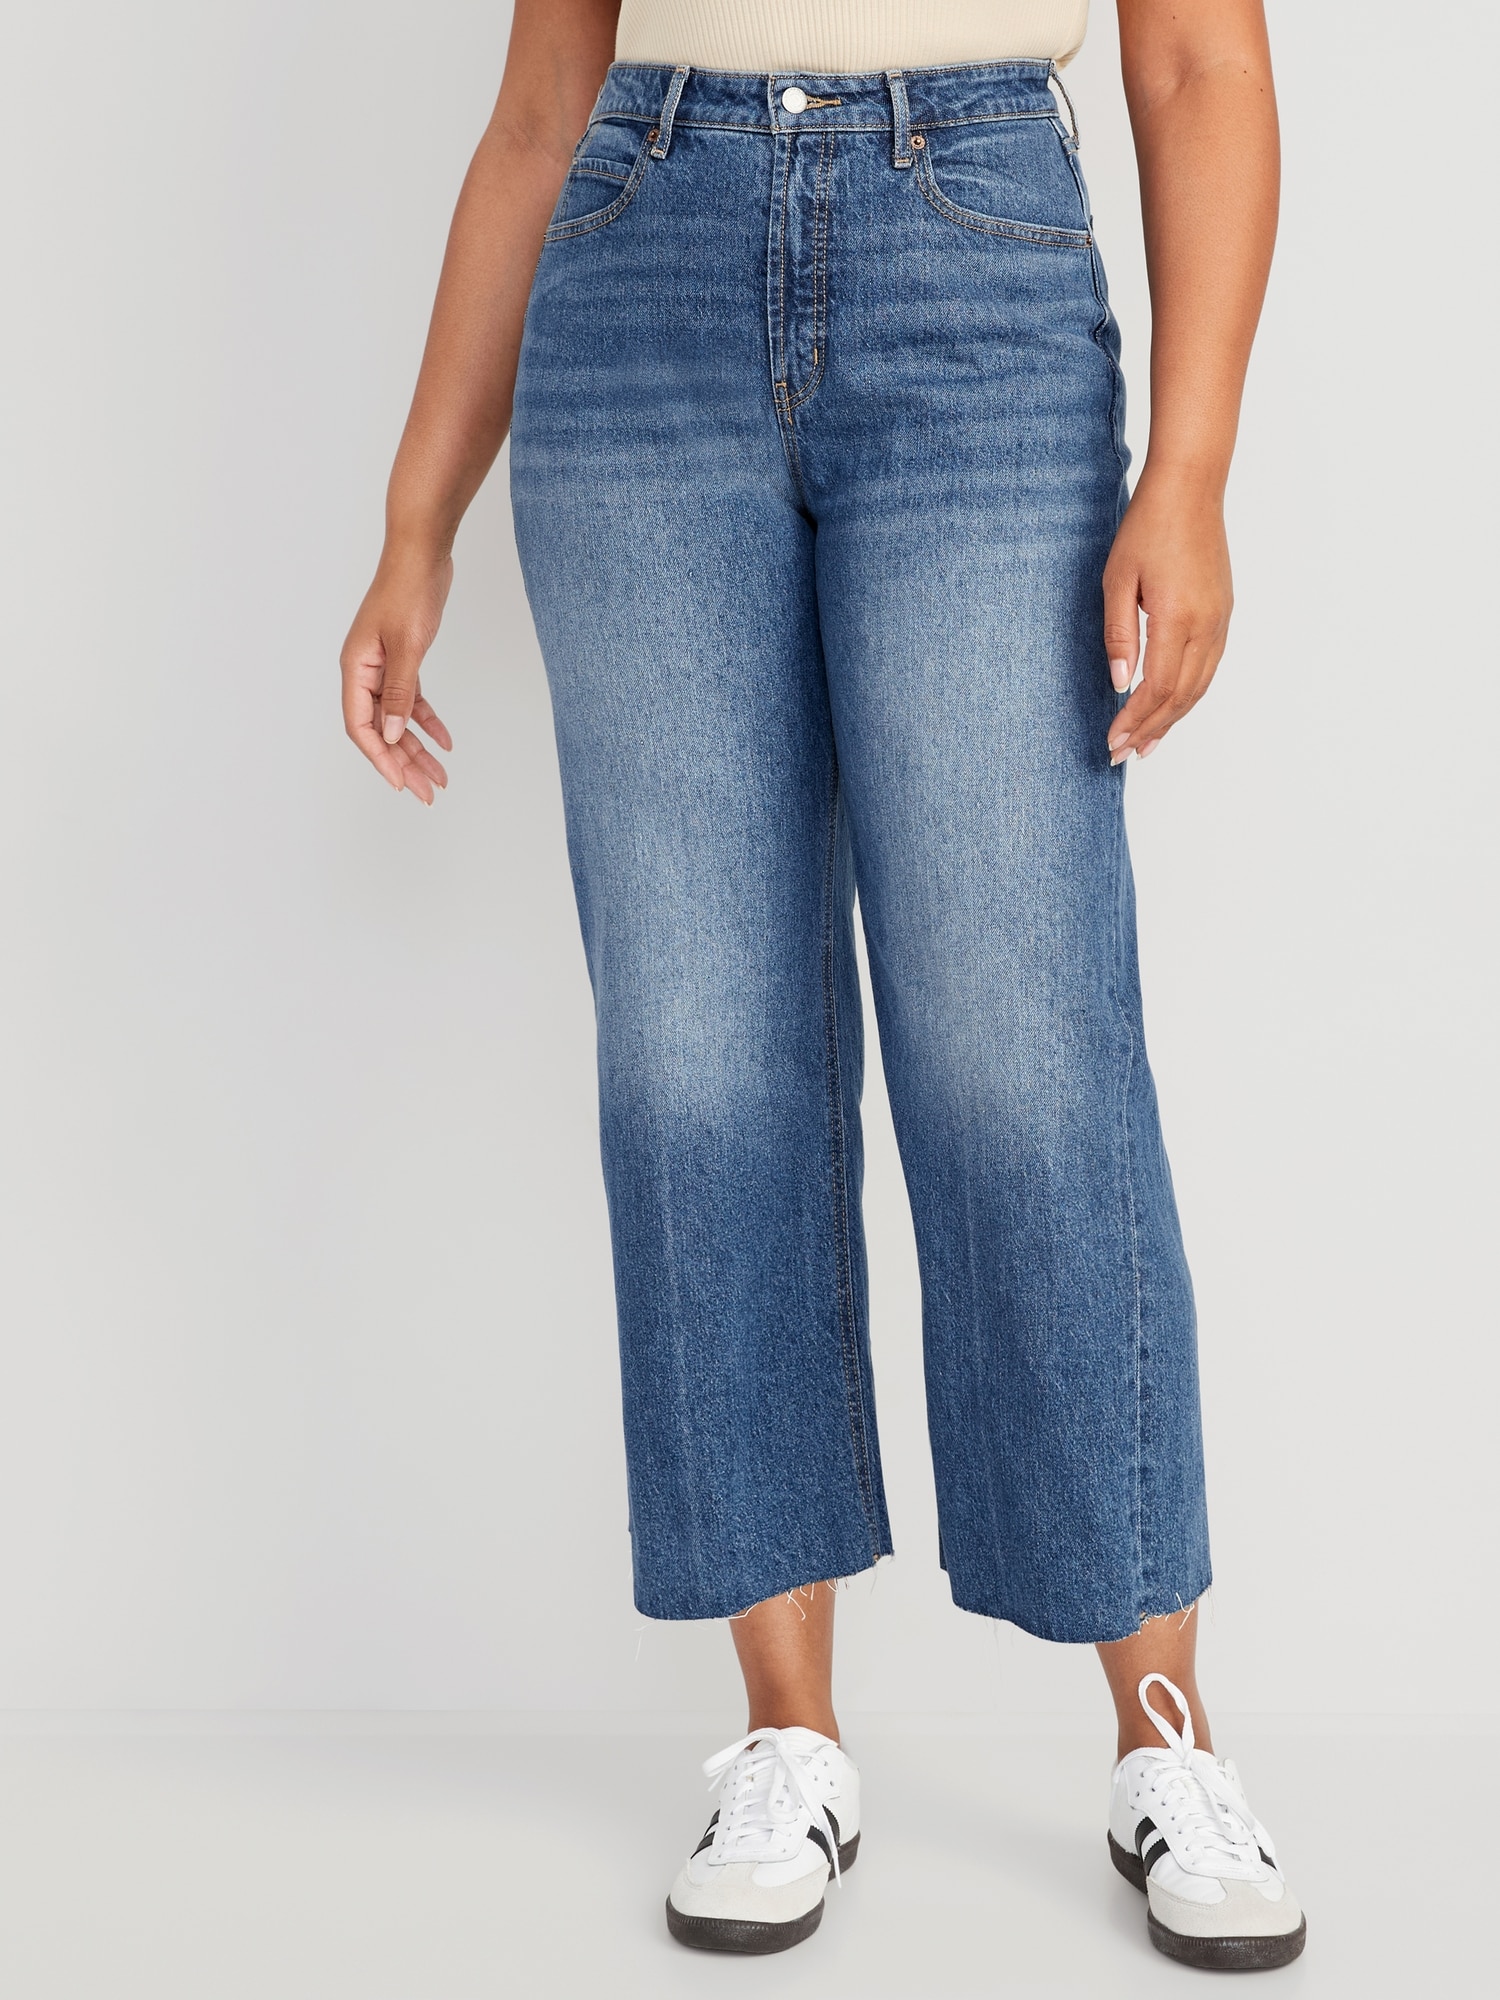 Jeans Cropped By Gap Size: 16